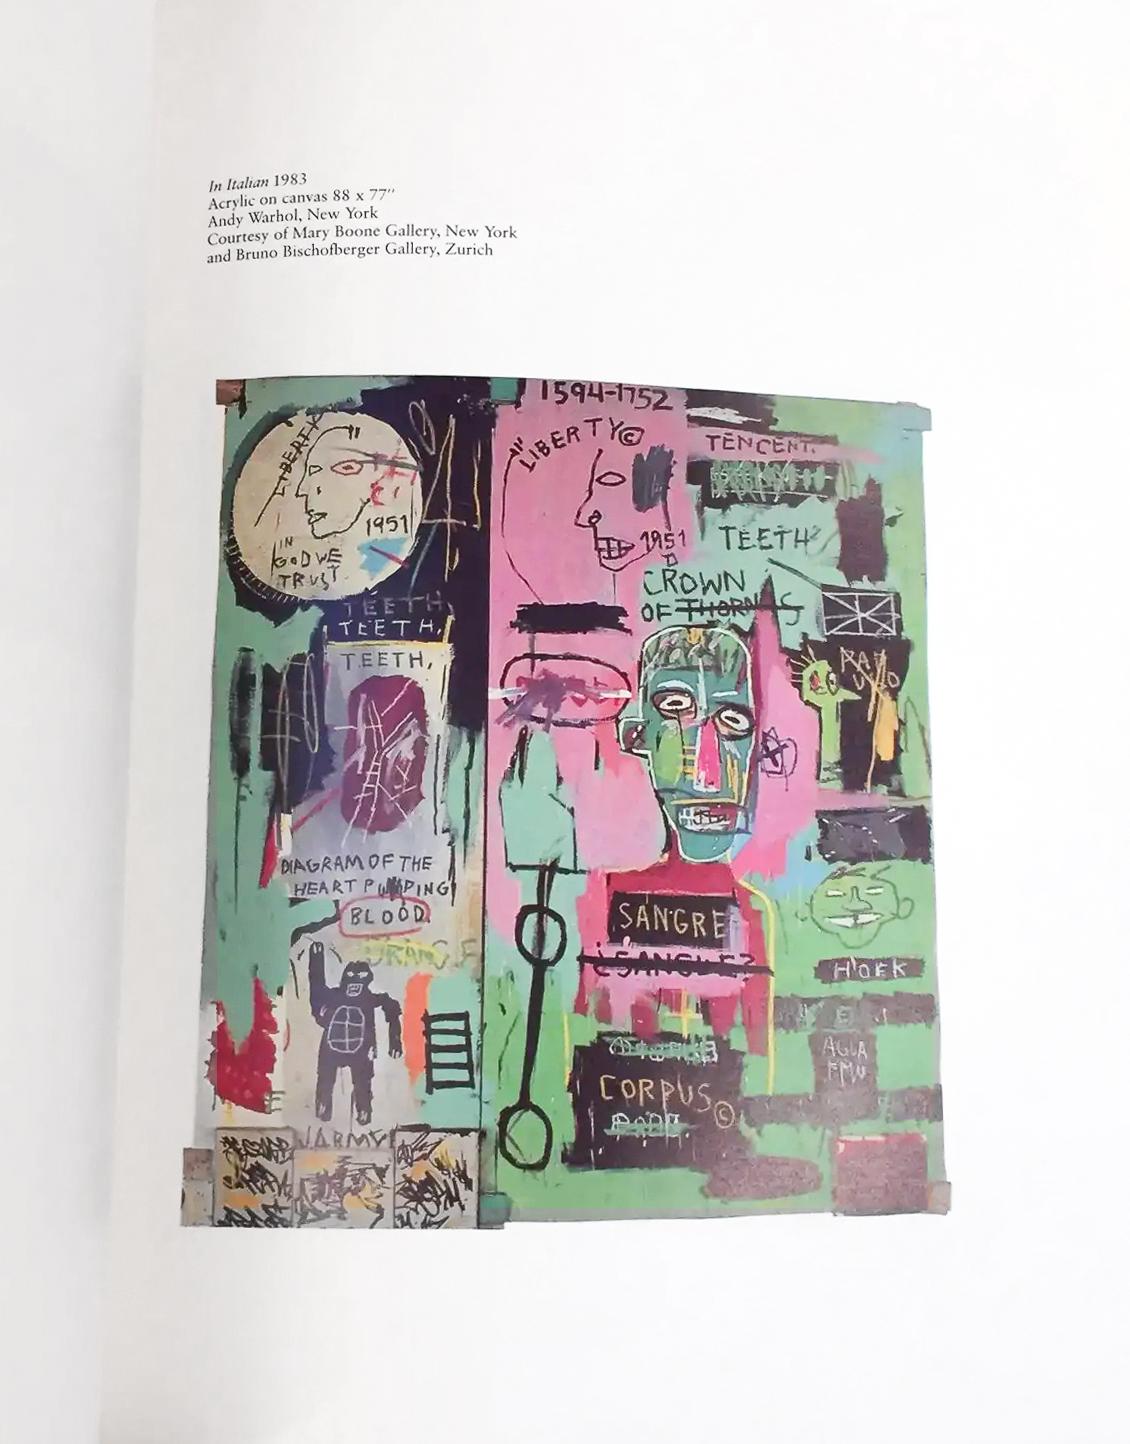 Basquiat Paintings 1981-1984 Fruitmarket Gallery Exhibition Catalog 1984 For Sale 2